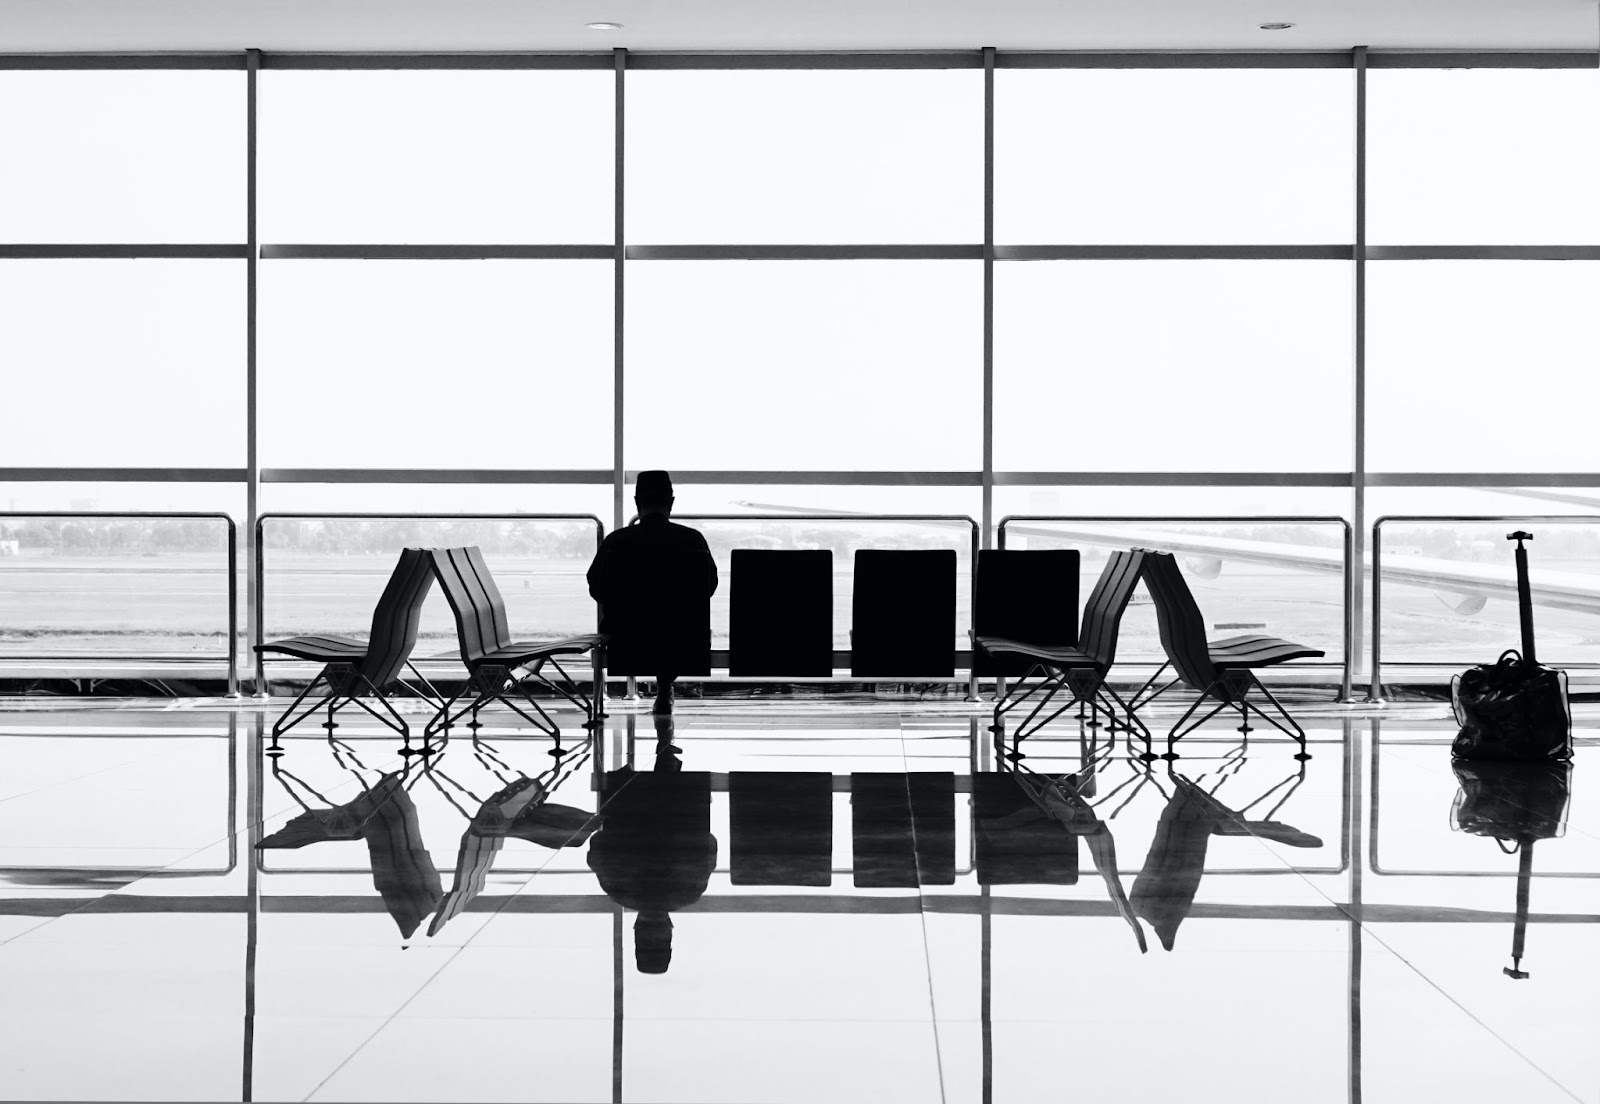 Man sitting in a quiet place at the airport